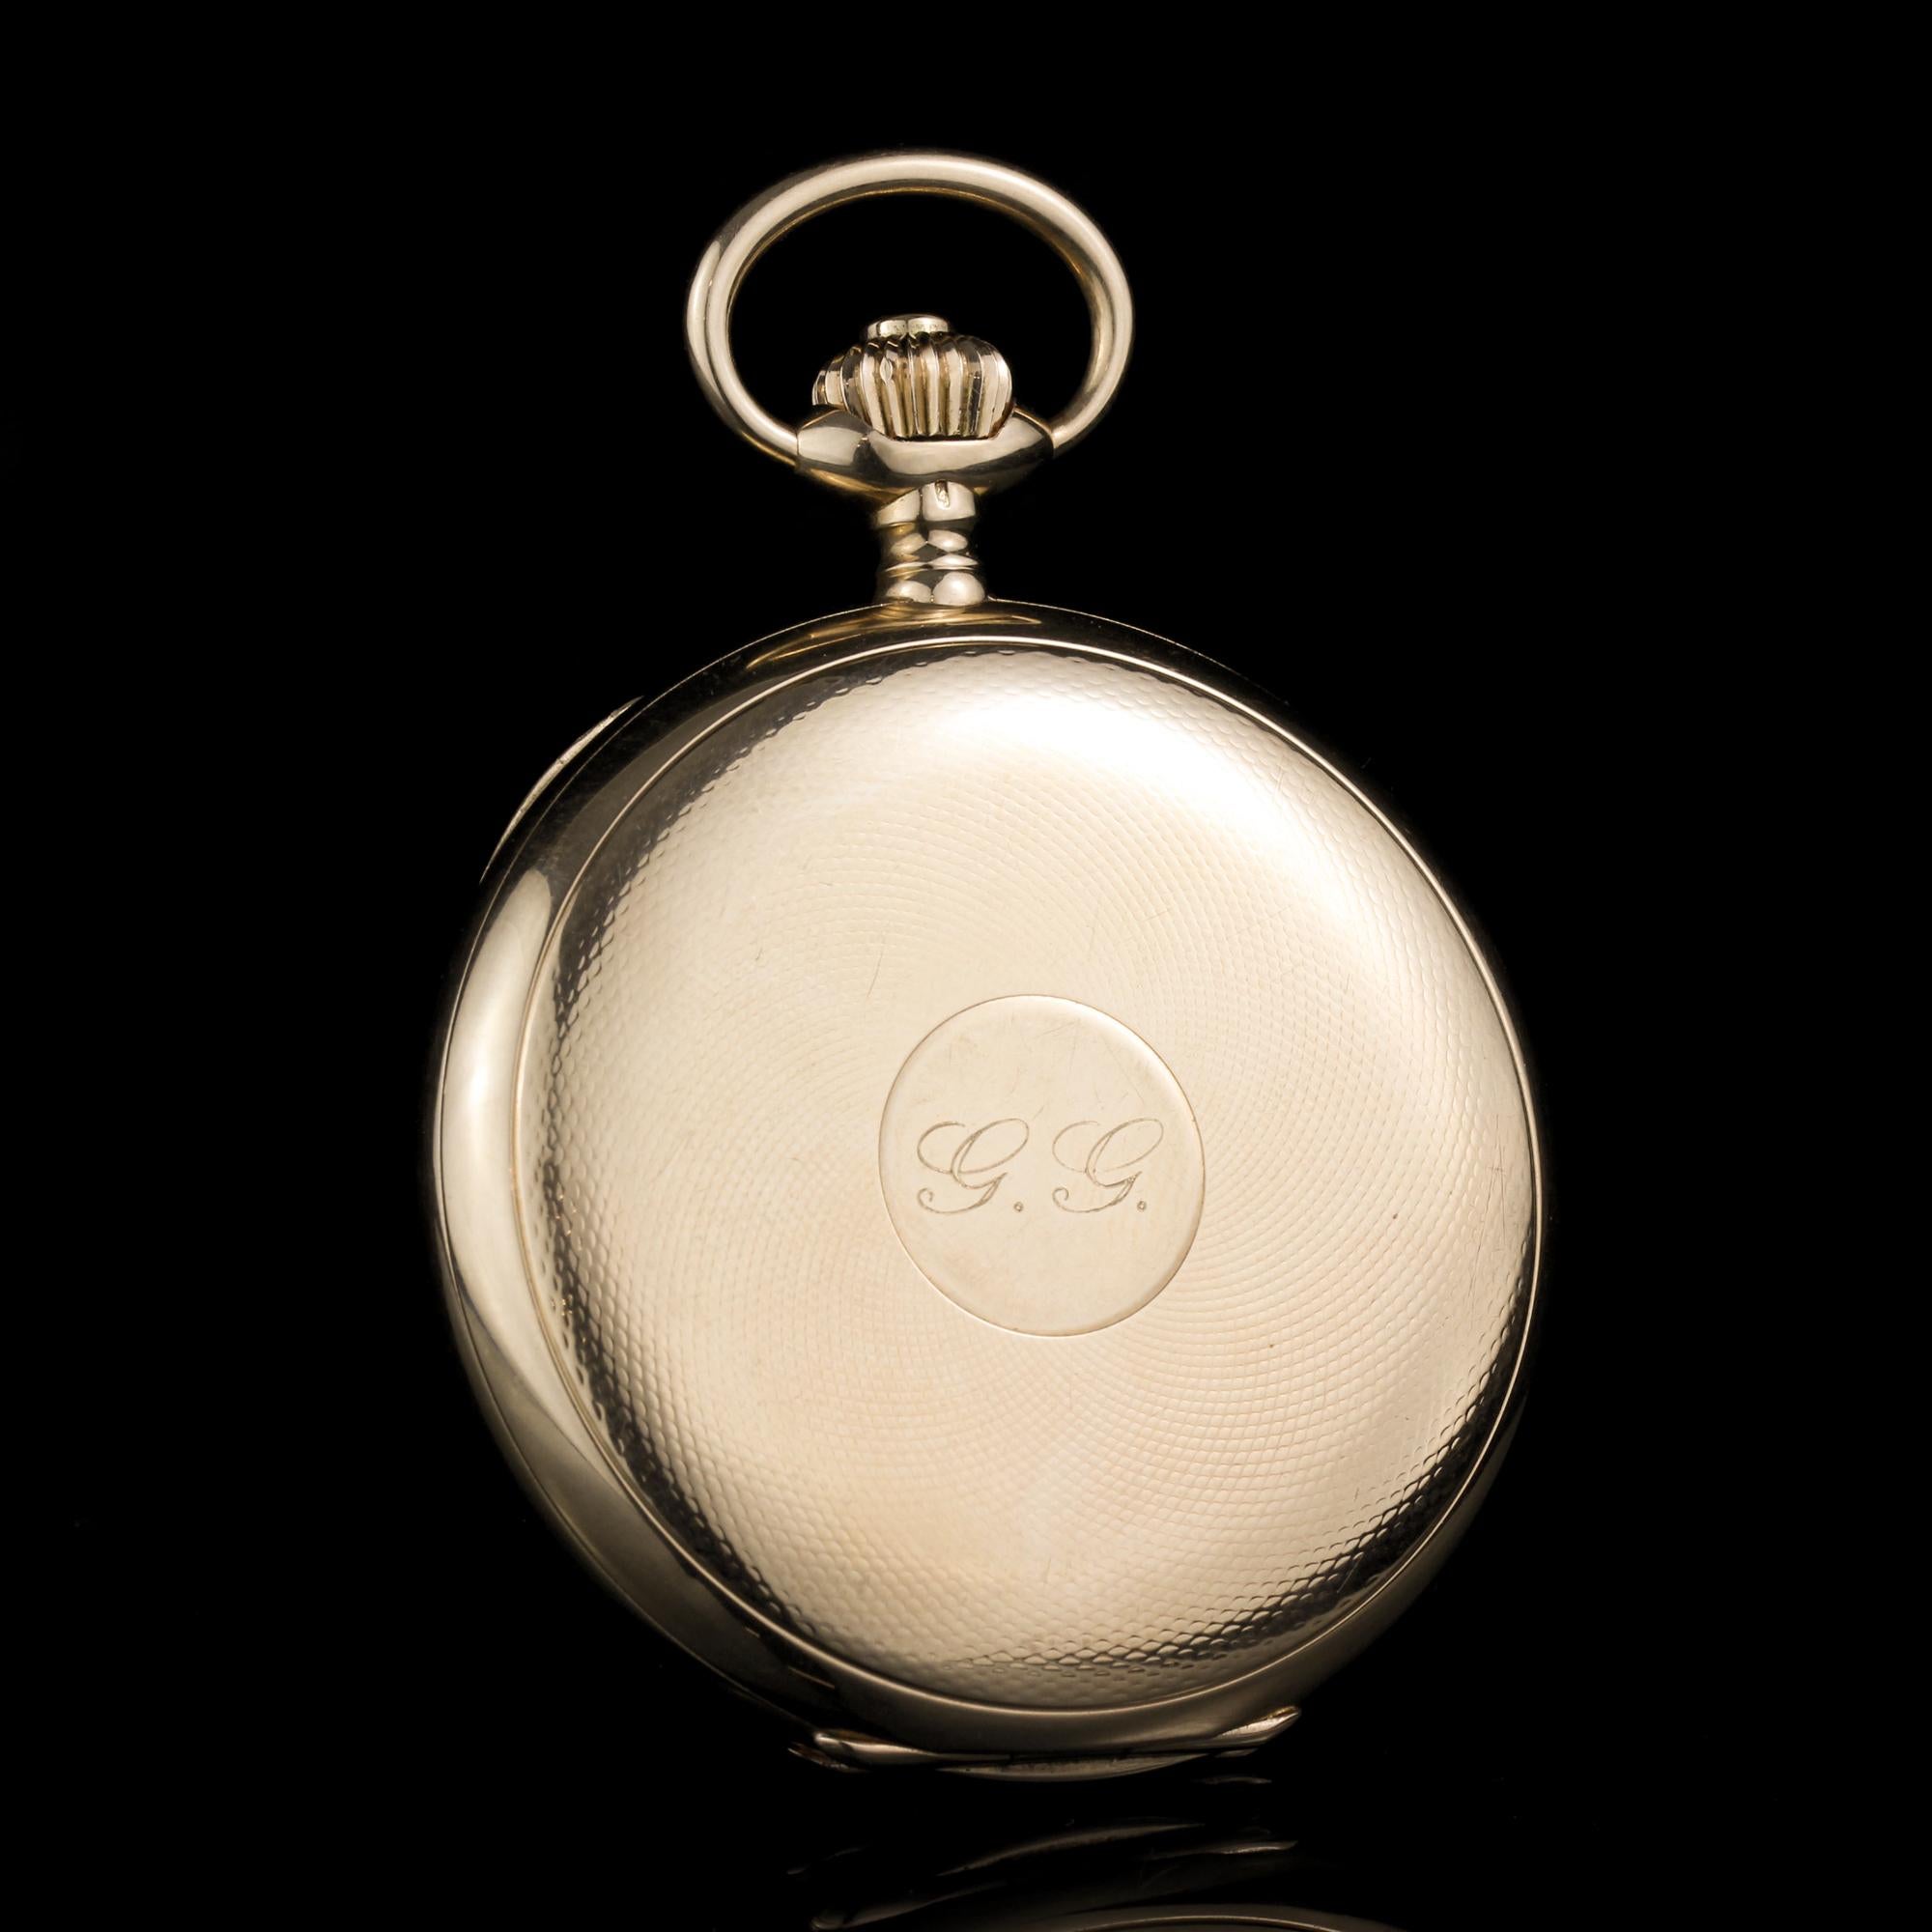 Antique Vacheron & Constantin 14kt gold pocket watch retailed by Retailed BY CARL RANCH'S EFTF, KJΦBENHAVN (SIC)
Made in Switzerland Circa 1918.
Fully hallmarked 14KT Gold
Ref NR: 233561

Movement: Gilt Swiss lever, cut and compensated bi-metallic